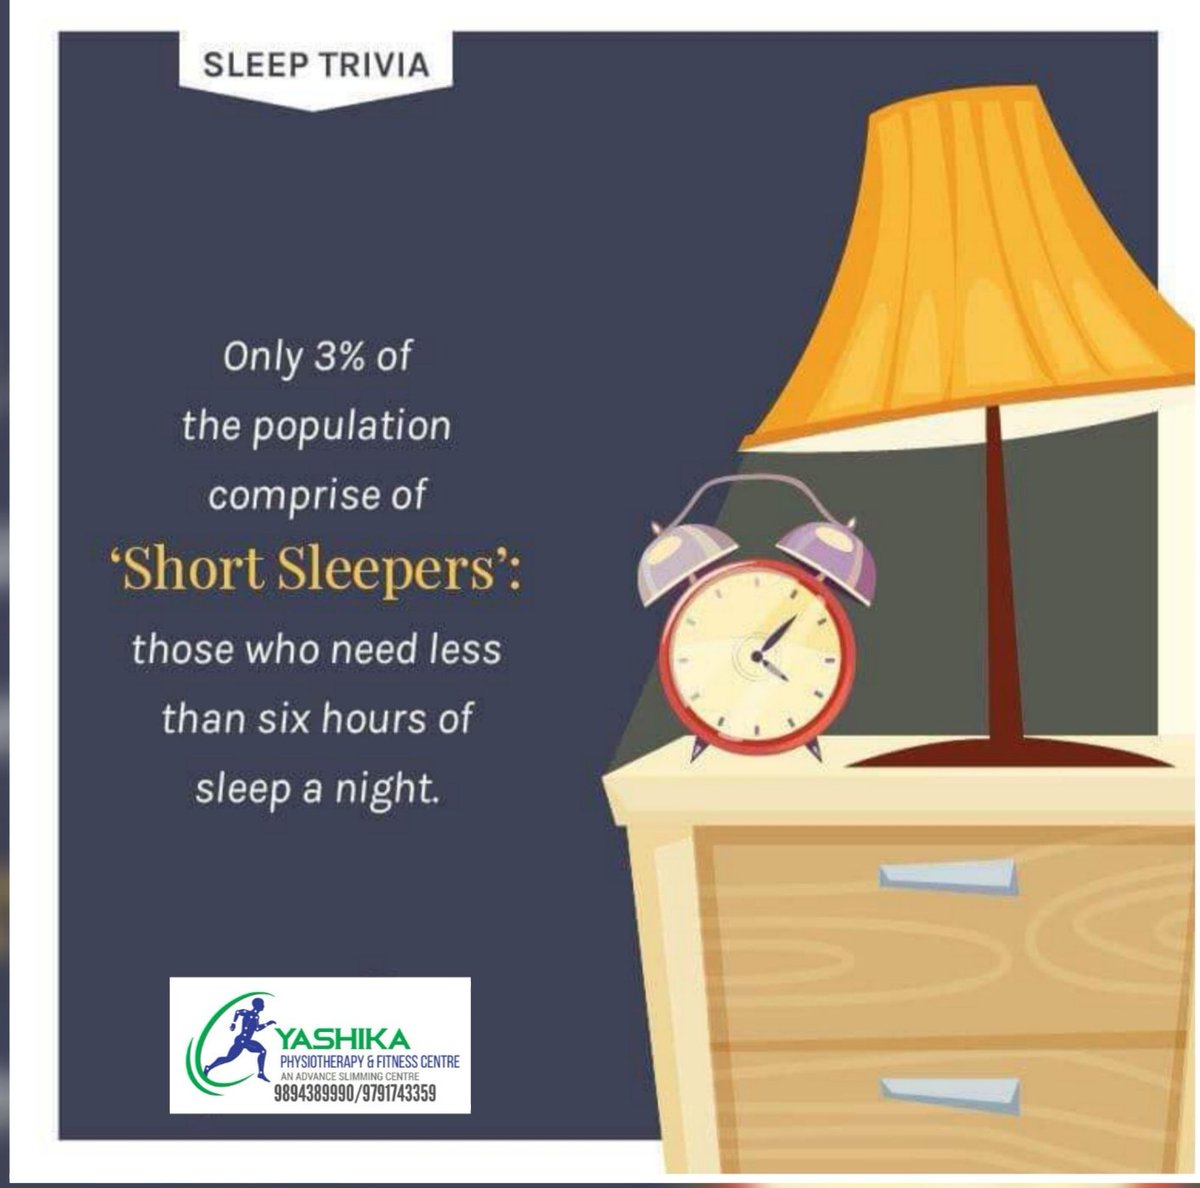 We all at an average need 7-8 hours of sleep, so unless you are a 'short sleeper' do not compromise on blessed Sleep.

#sleep #wellness #trivia #sleeptrivia #YashikaPhysiotherapy #startups